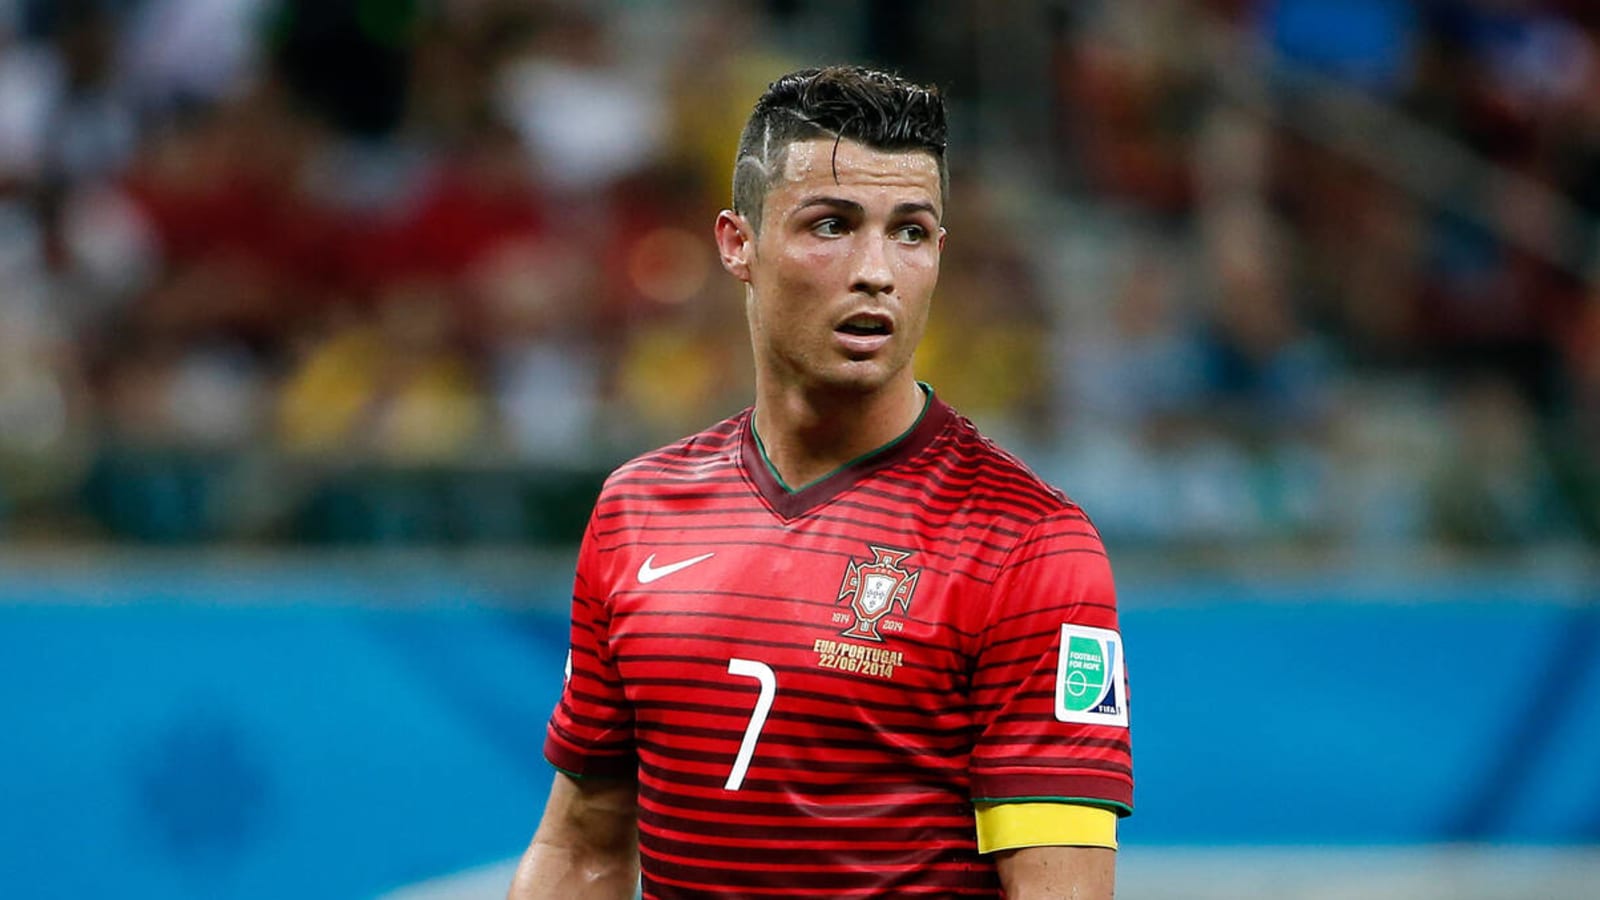 Cristiano Ronaldo returns to training, reportedly still wants to leave Manchester United